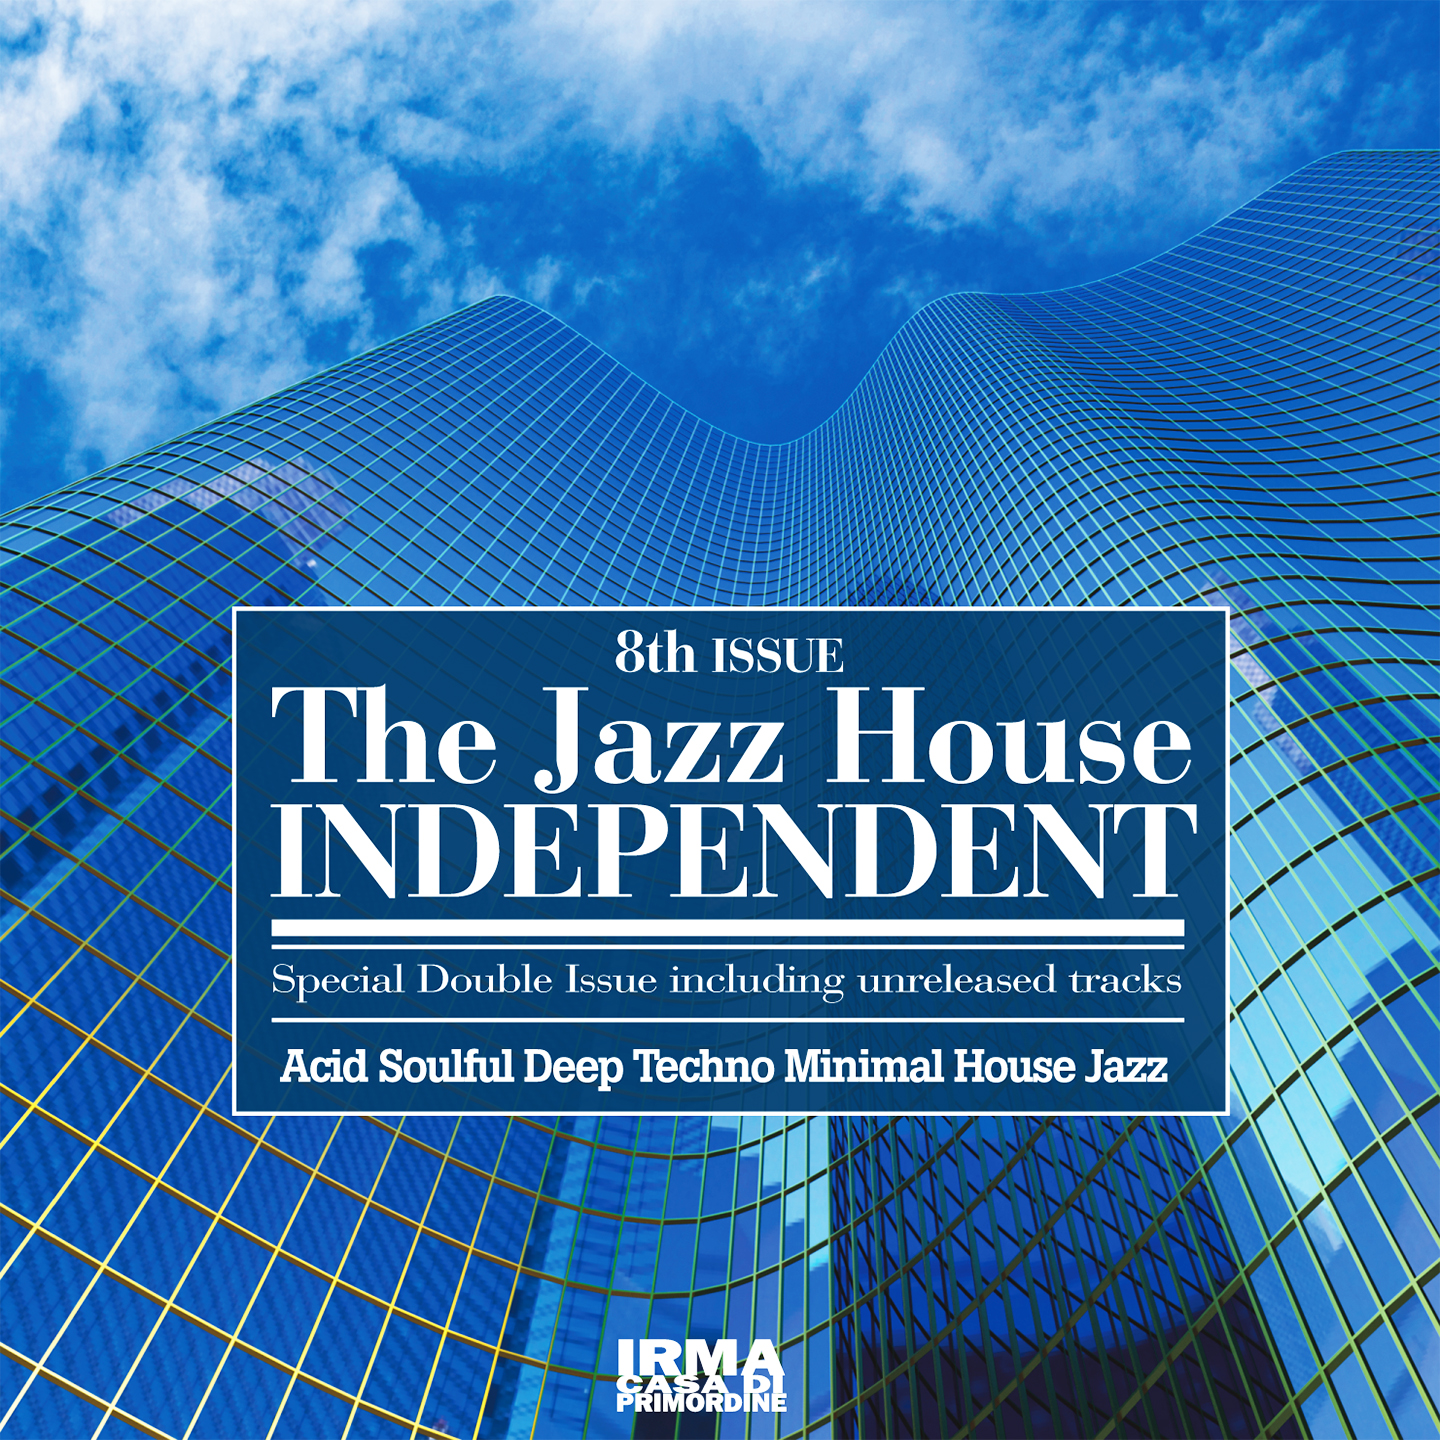 The Jazz House Independent - 8th Issue